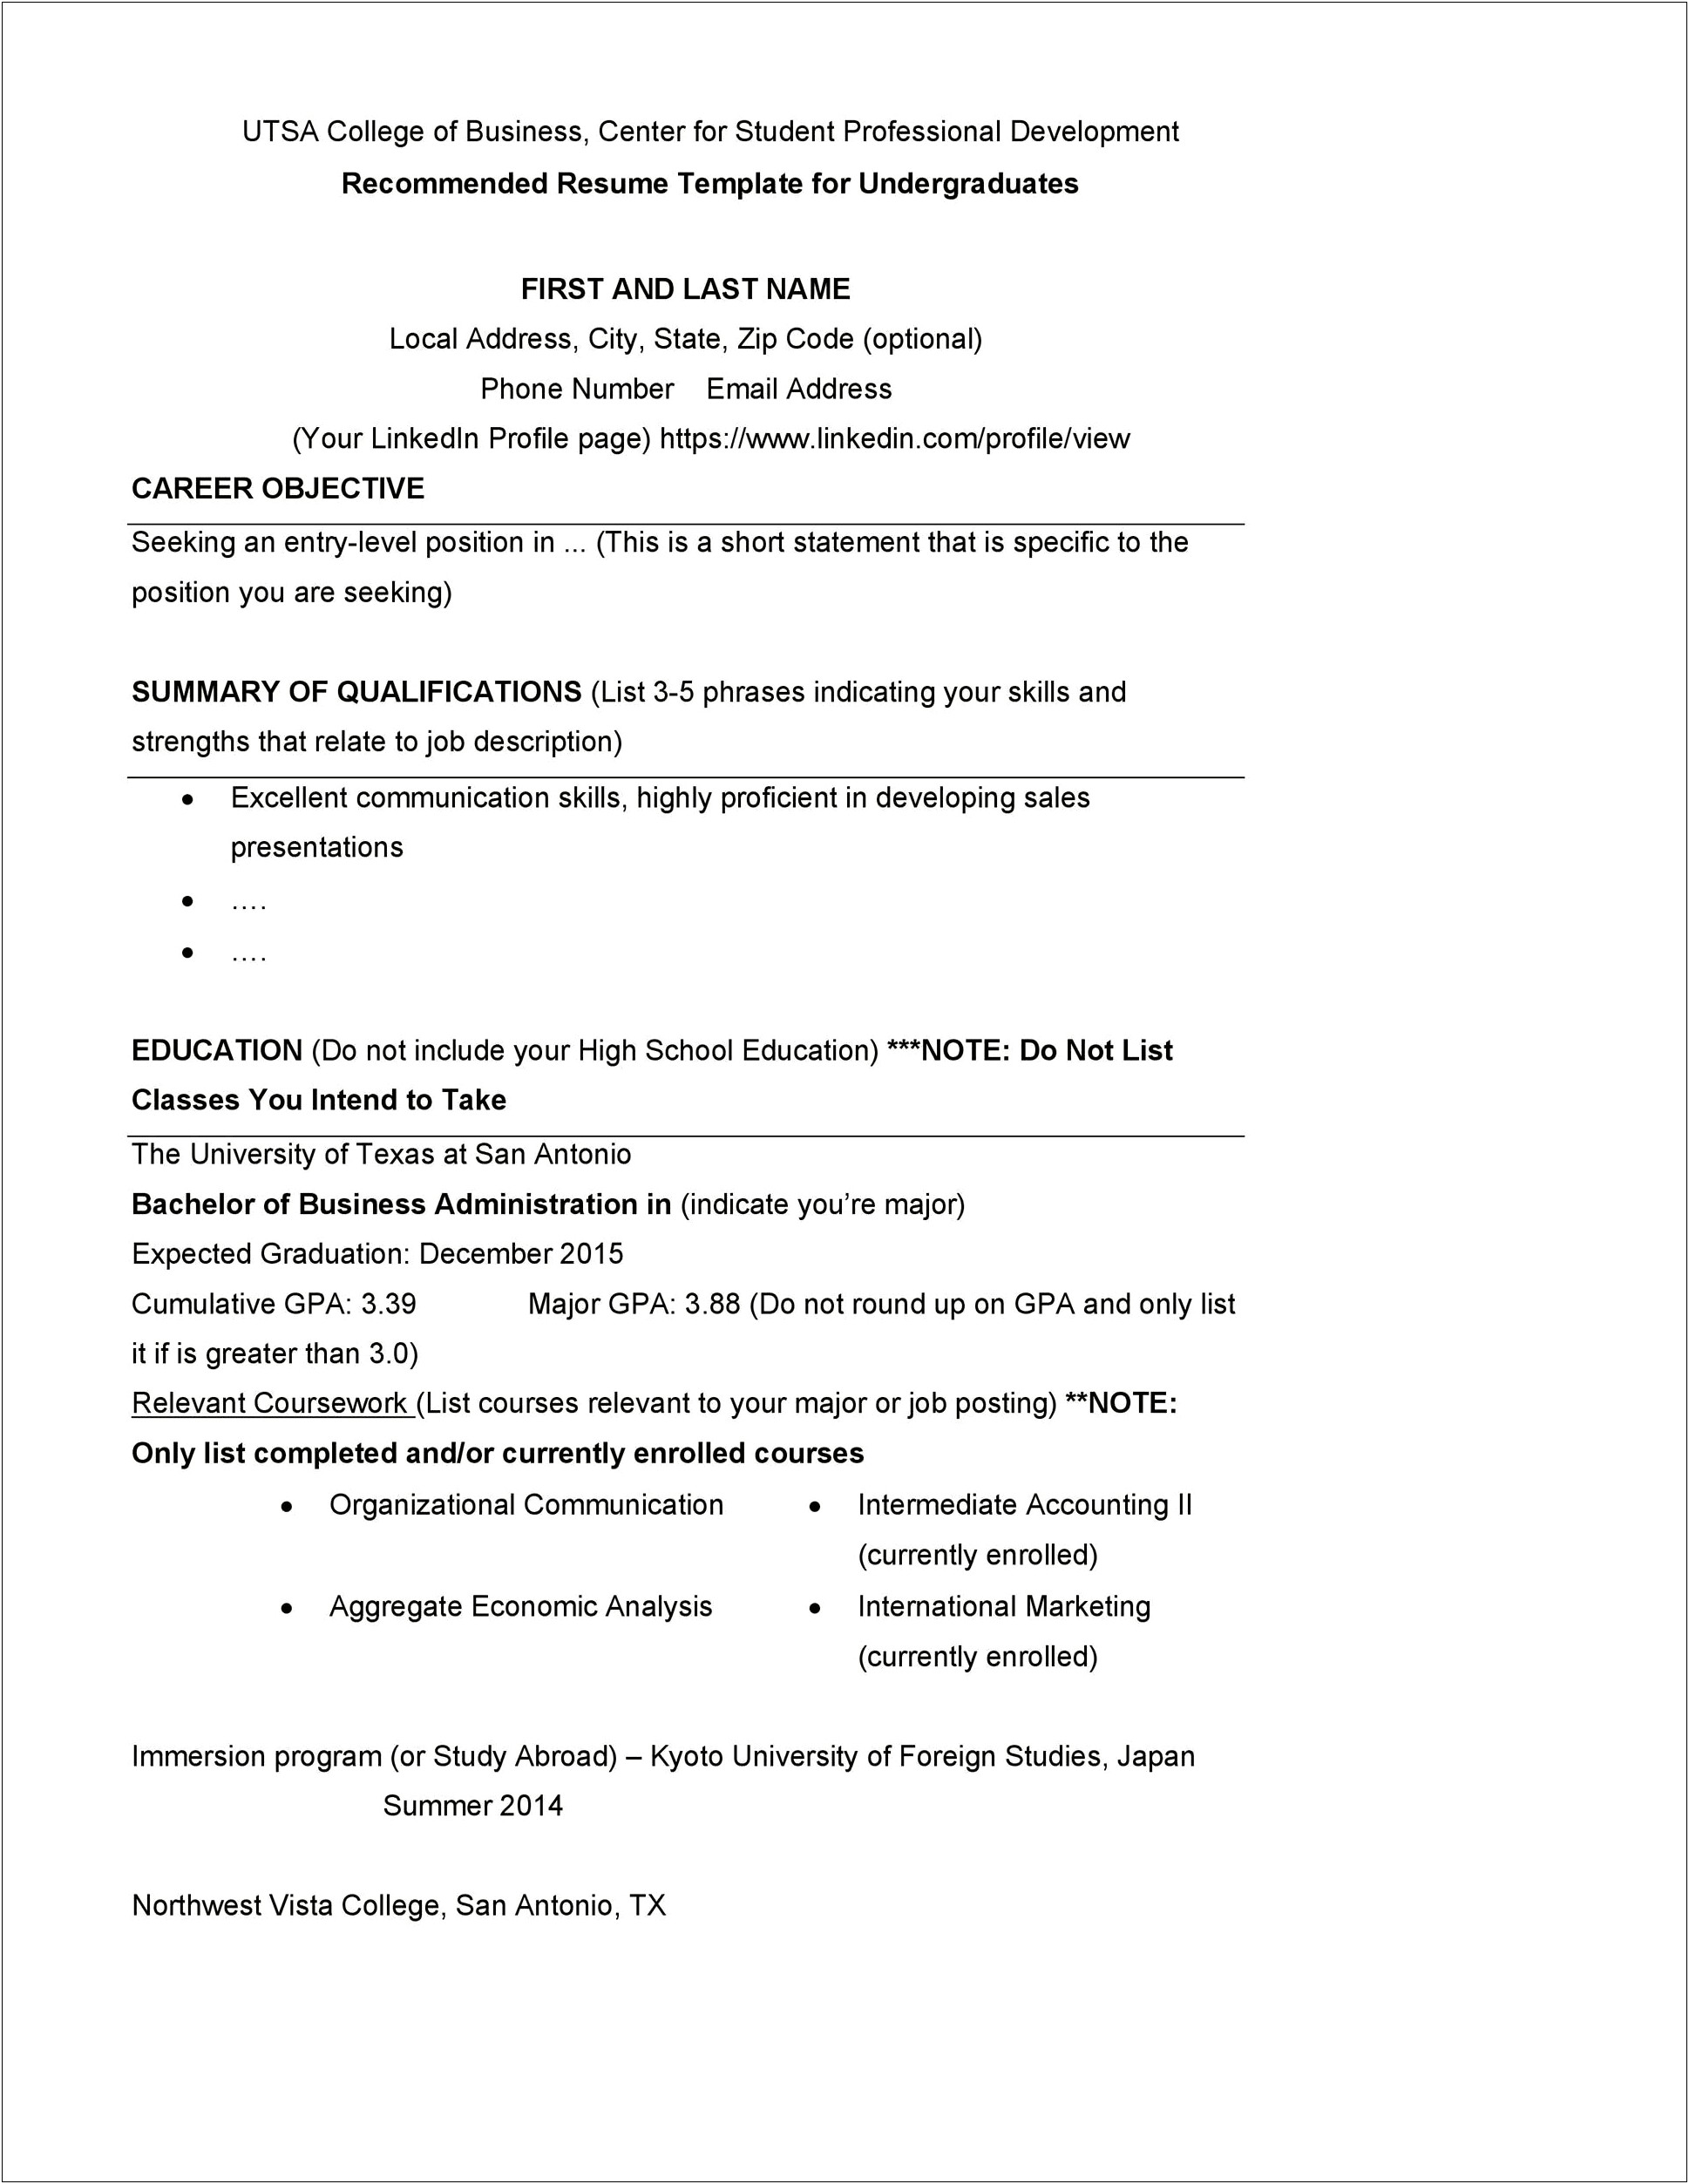 Sample Resumes For First Job Undergraduate